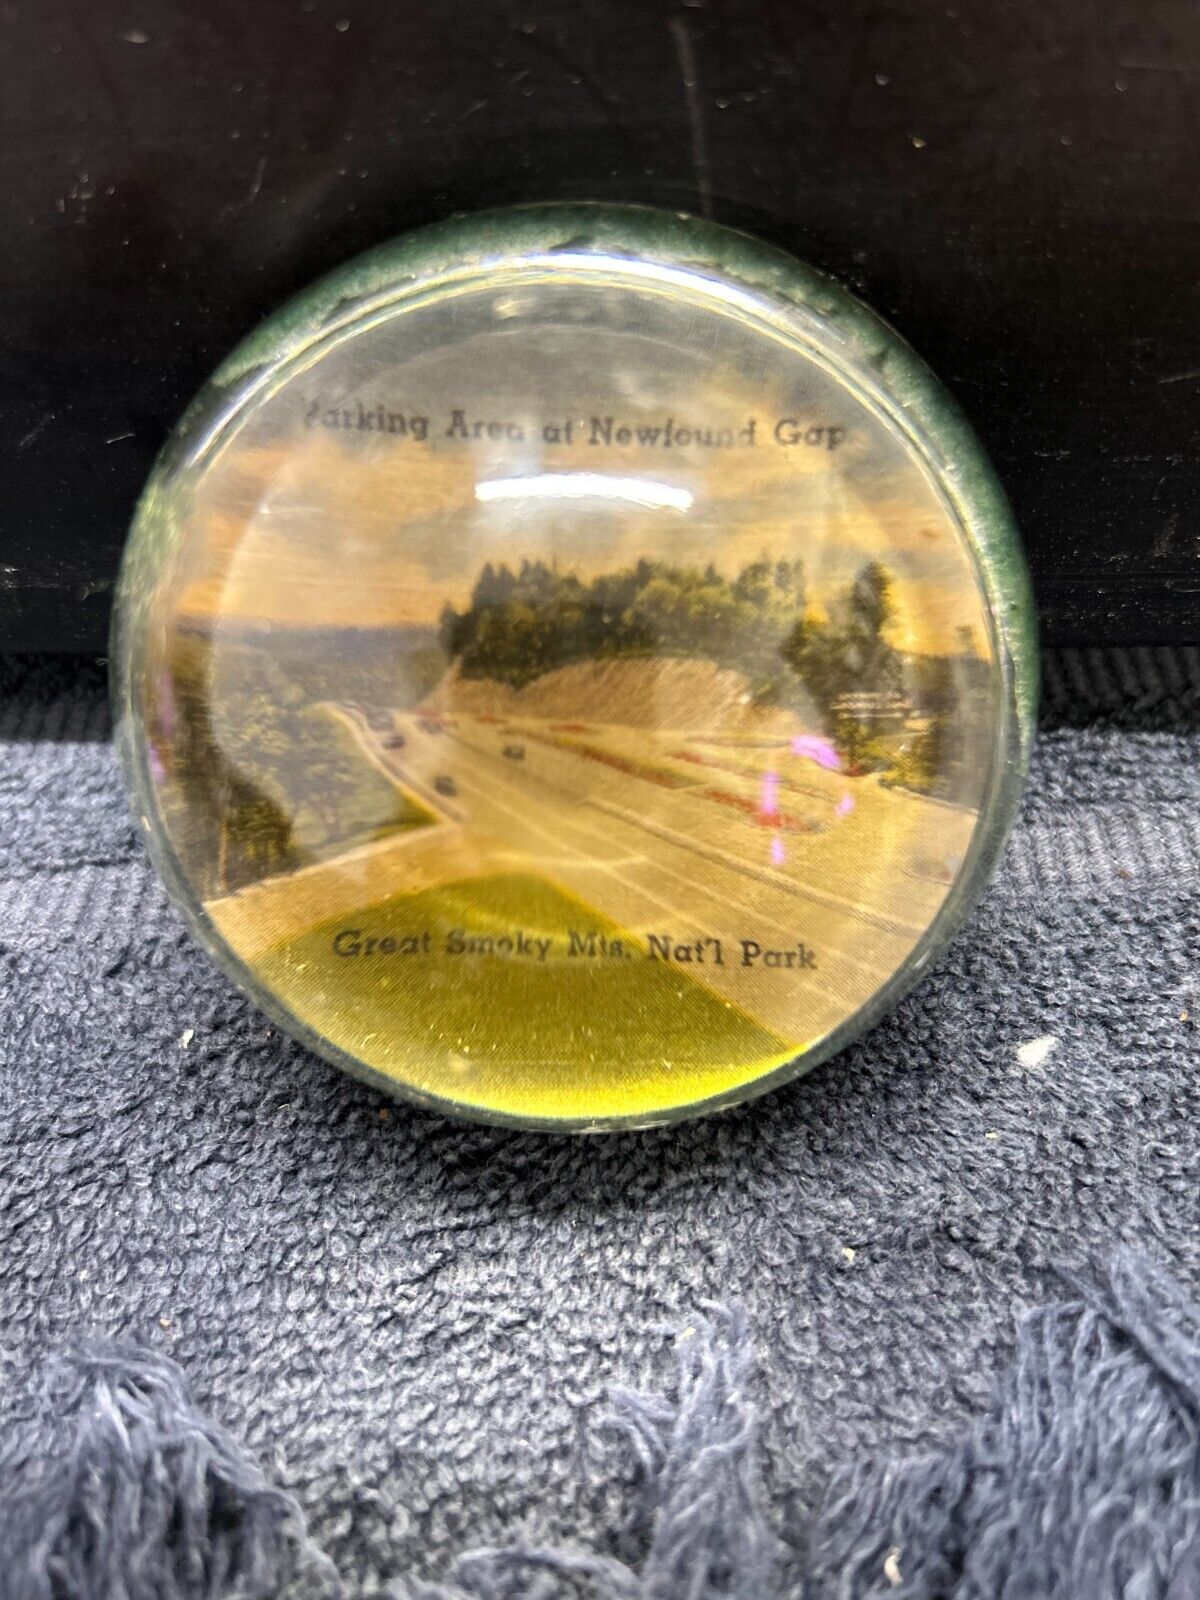 Vintage Newfound Gap Great Smoky Mountains Glass Paperweight